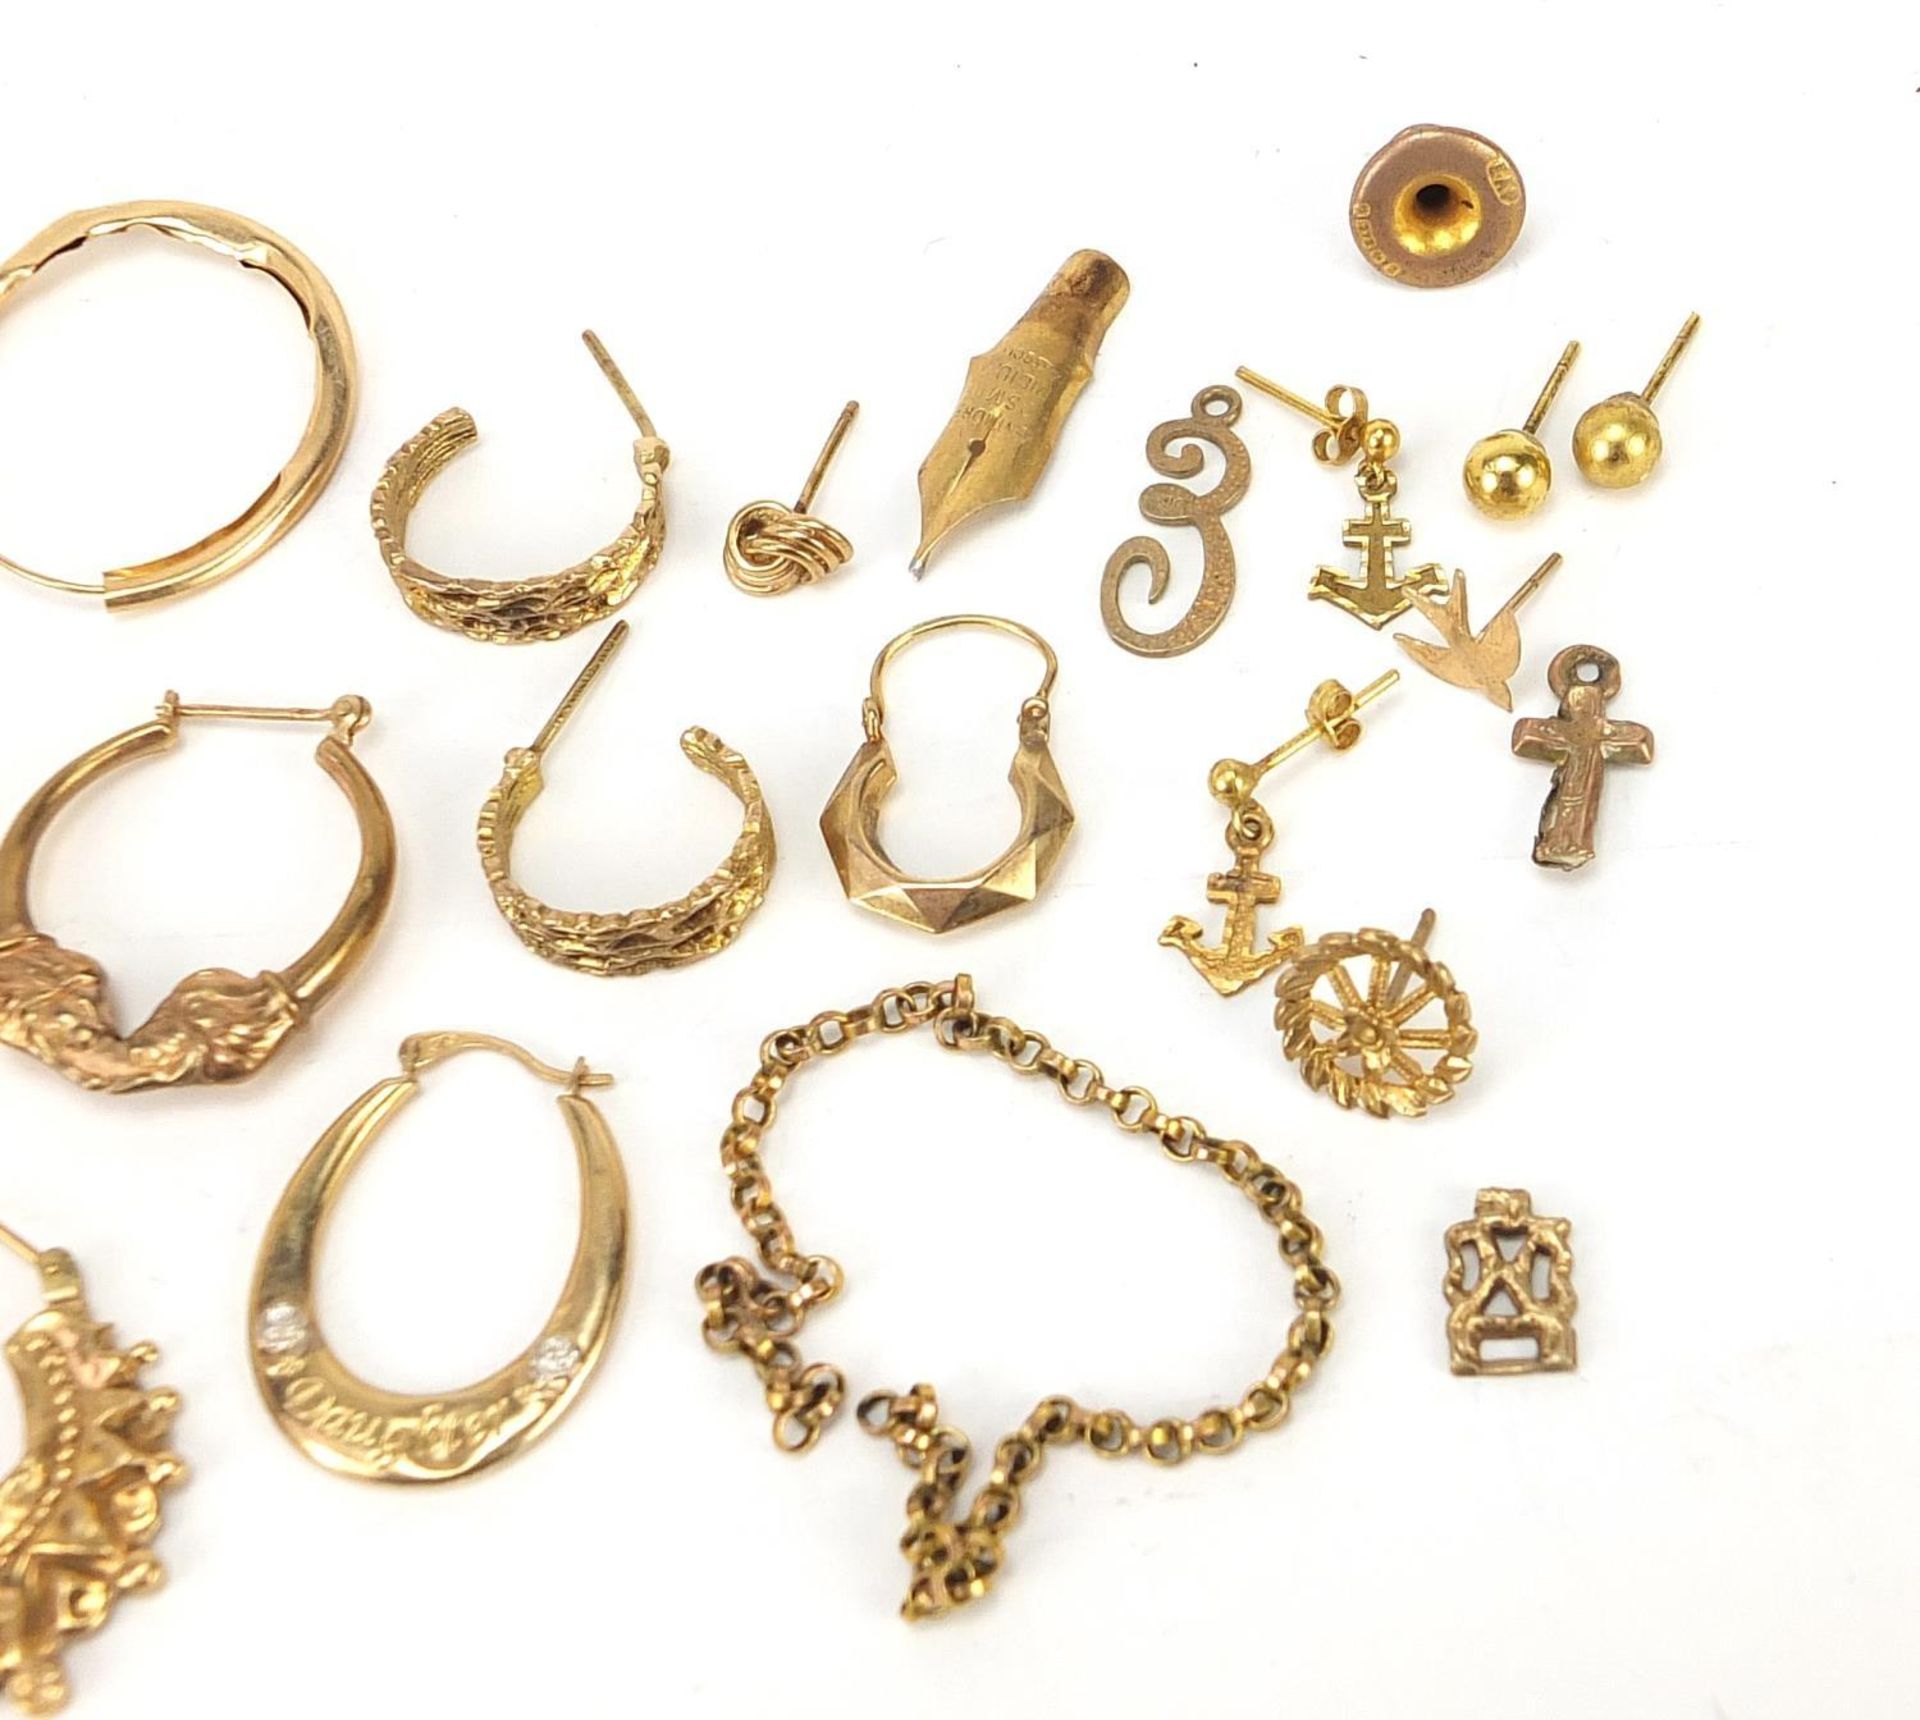 9ct gold jewellery including earrings, necklaces, Victorian bar brooch and 14ct gold fountain pen - Image 4 of 9